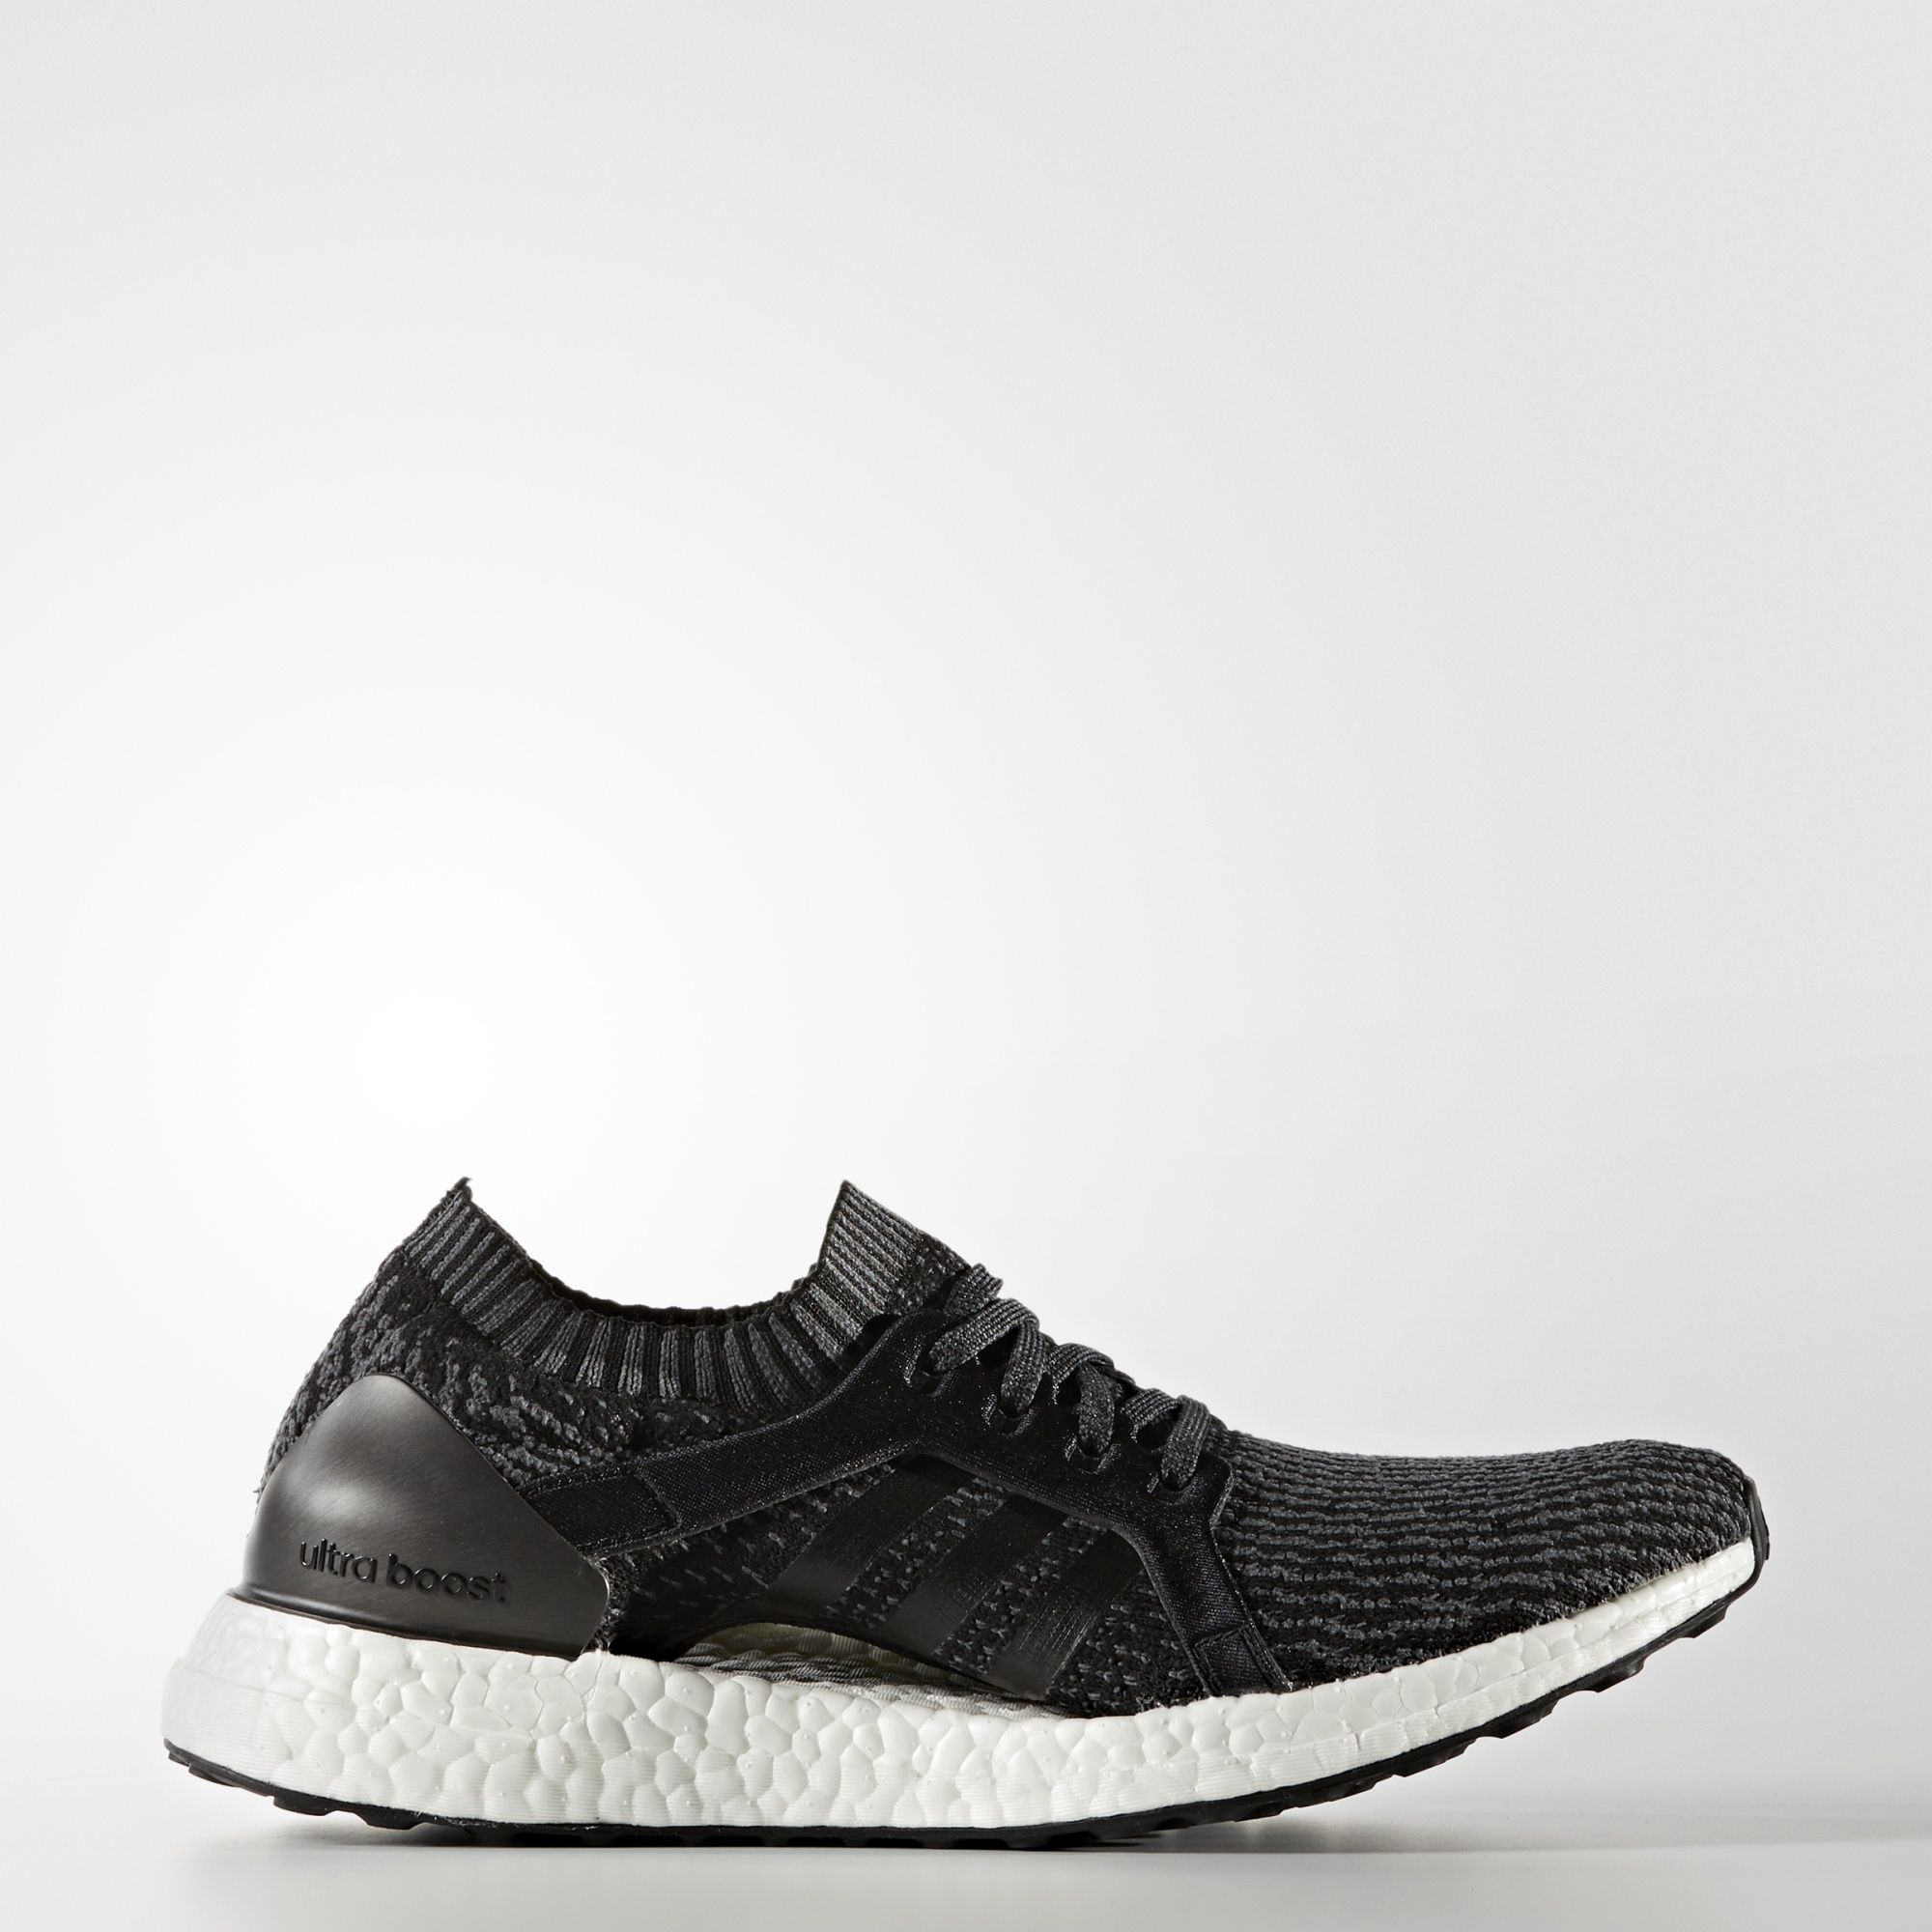 adidas ultra boost x homme